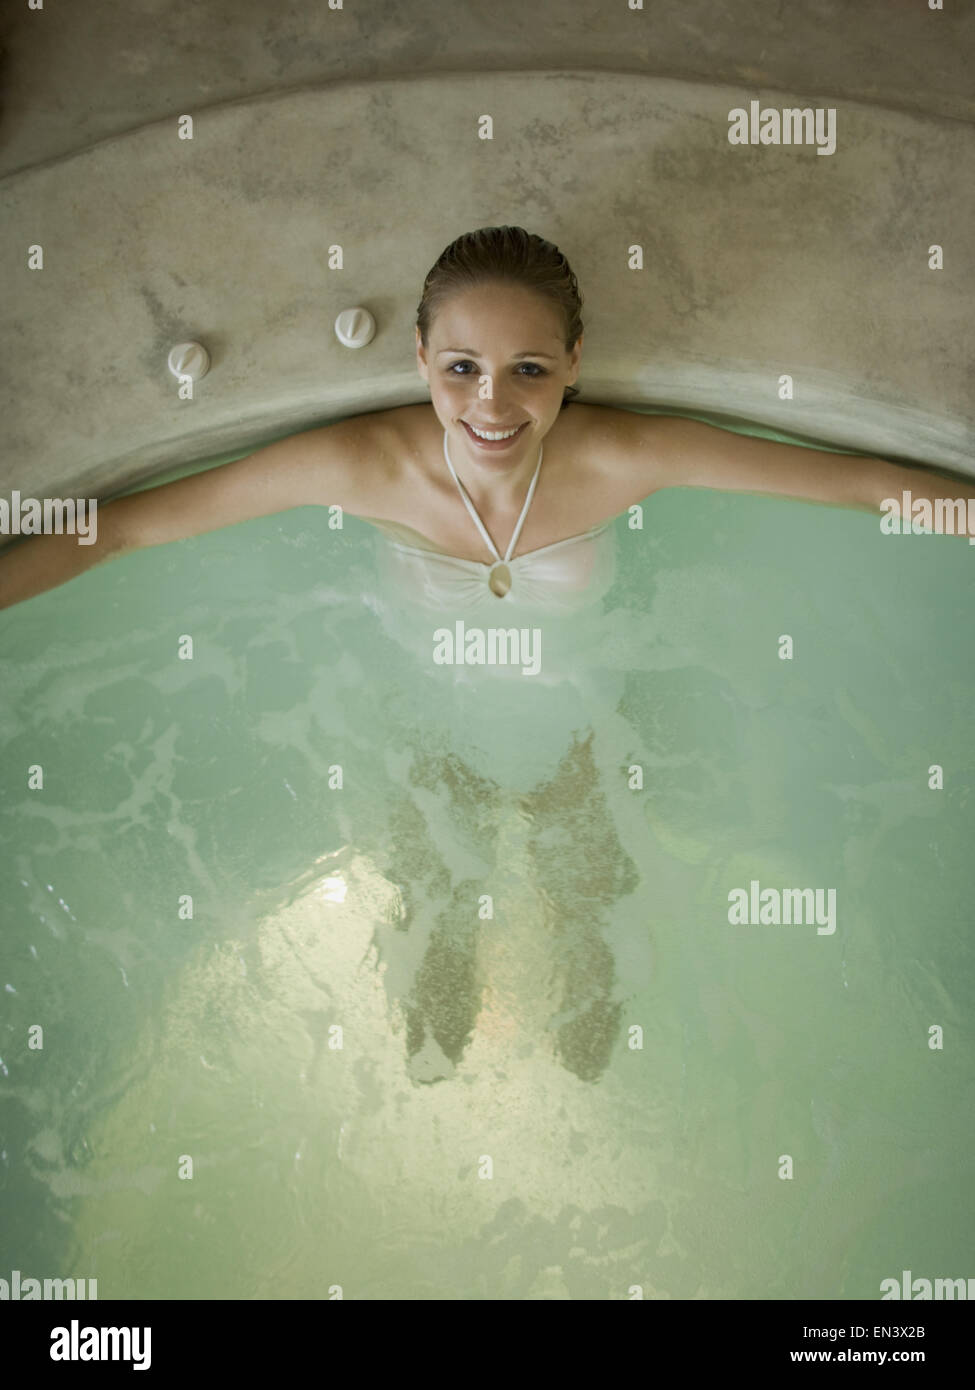 Woman in hot tub smiling Stock Photo